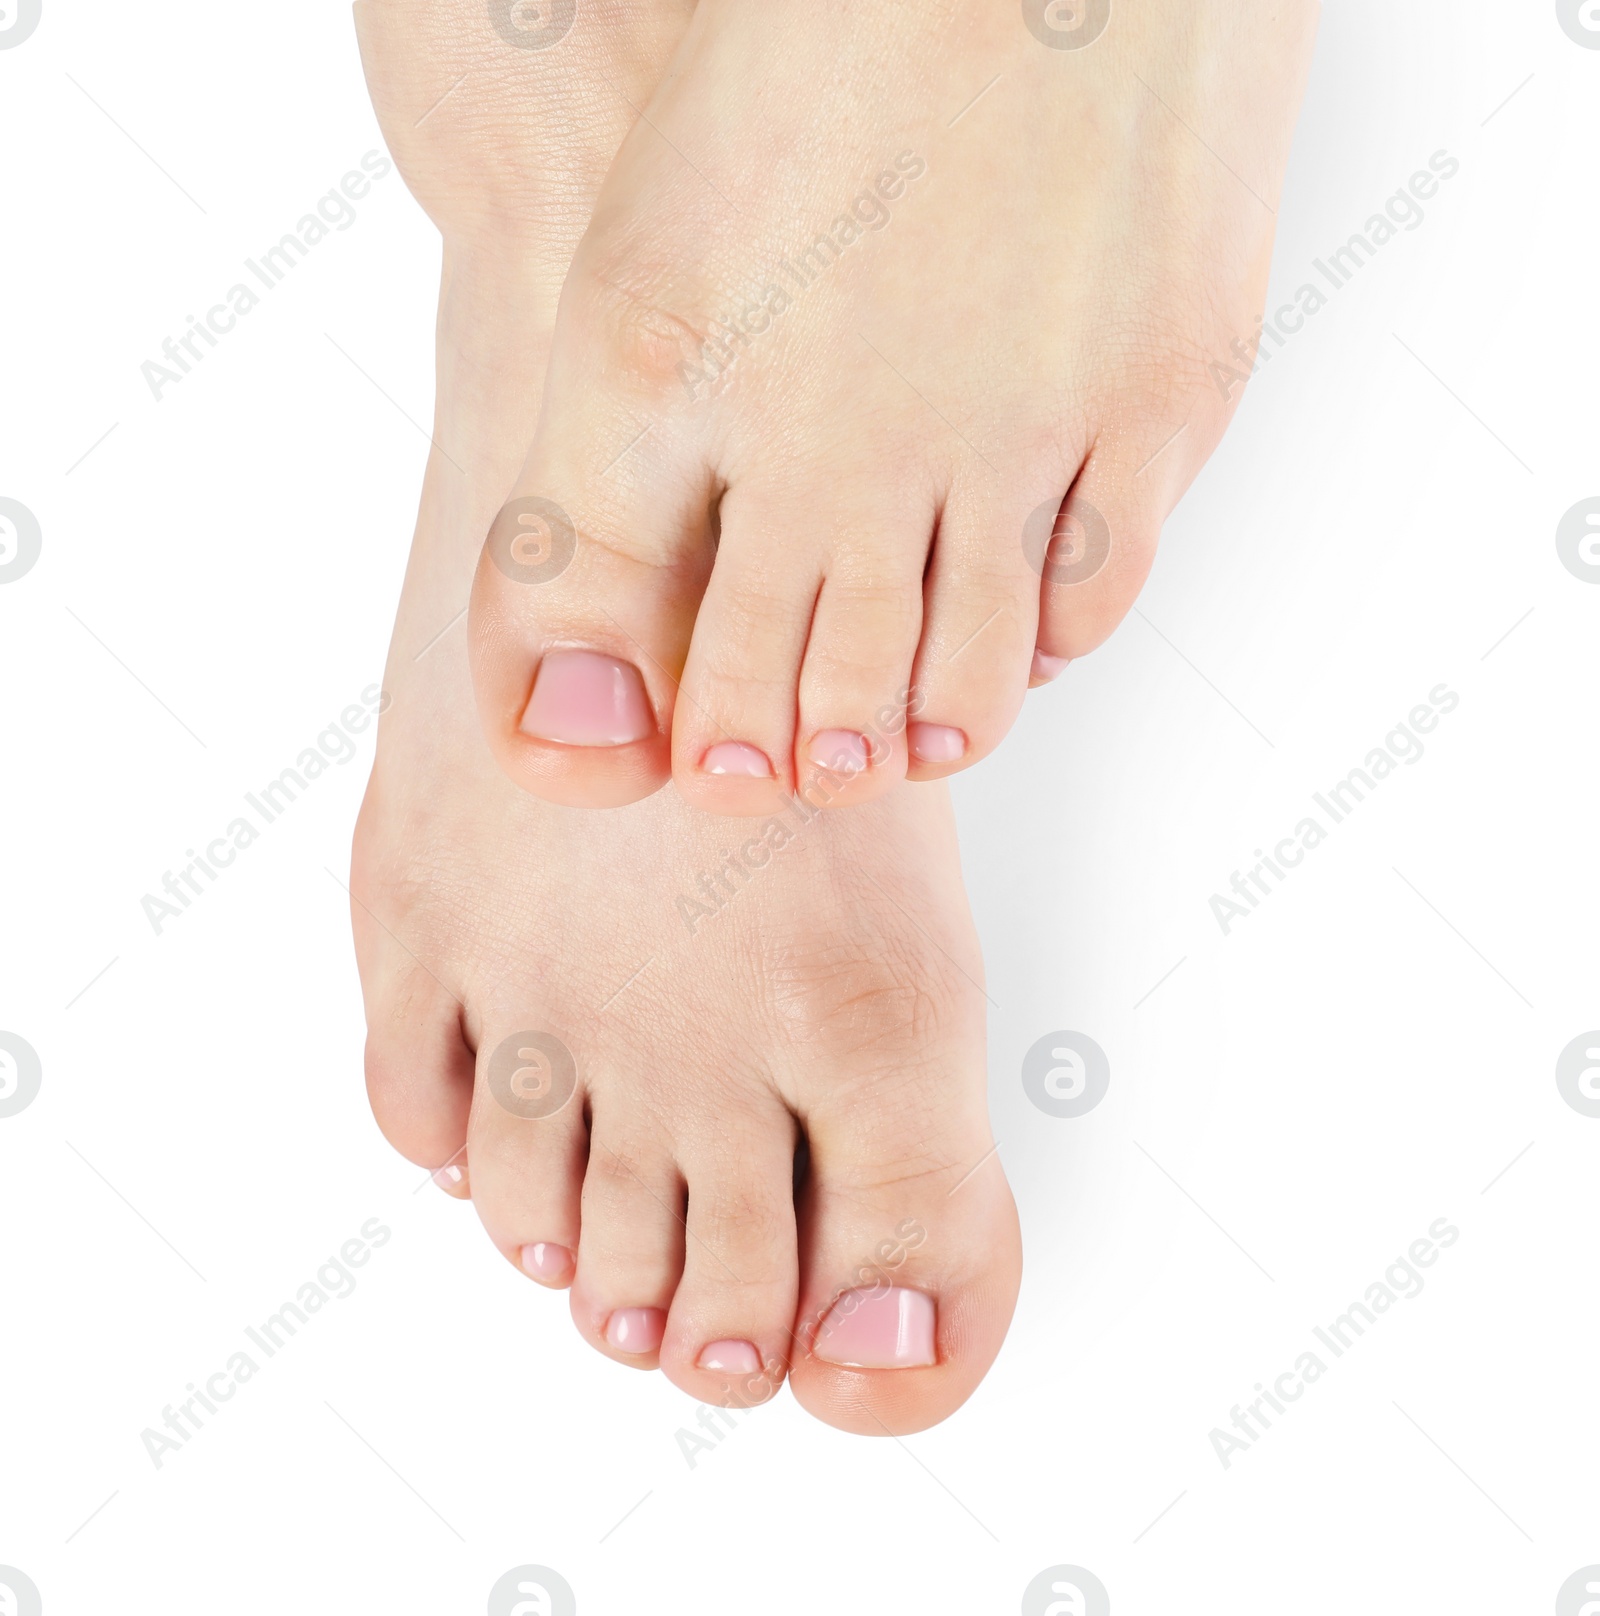 Photo of Woman with neat toenails after pedicure procedure isolated on white, closeup